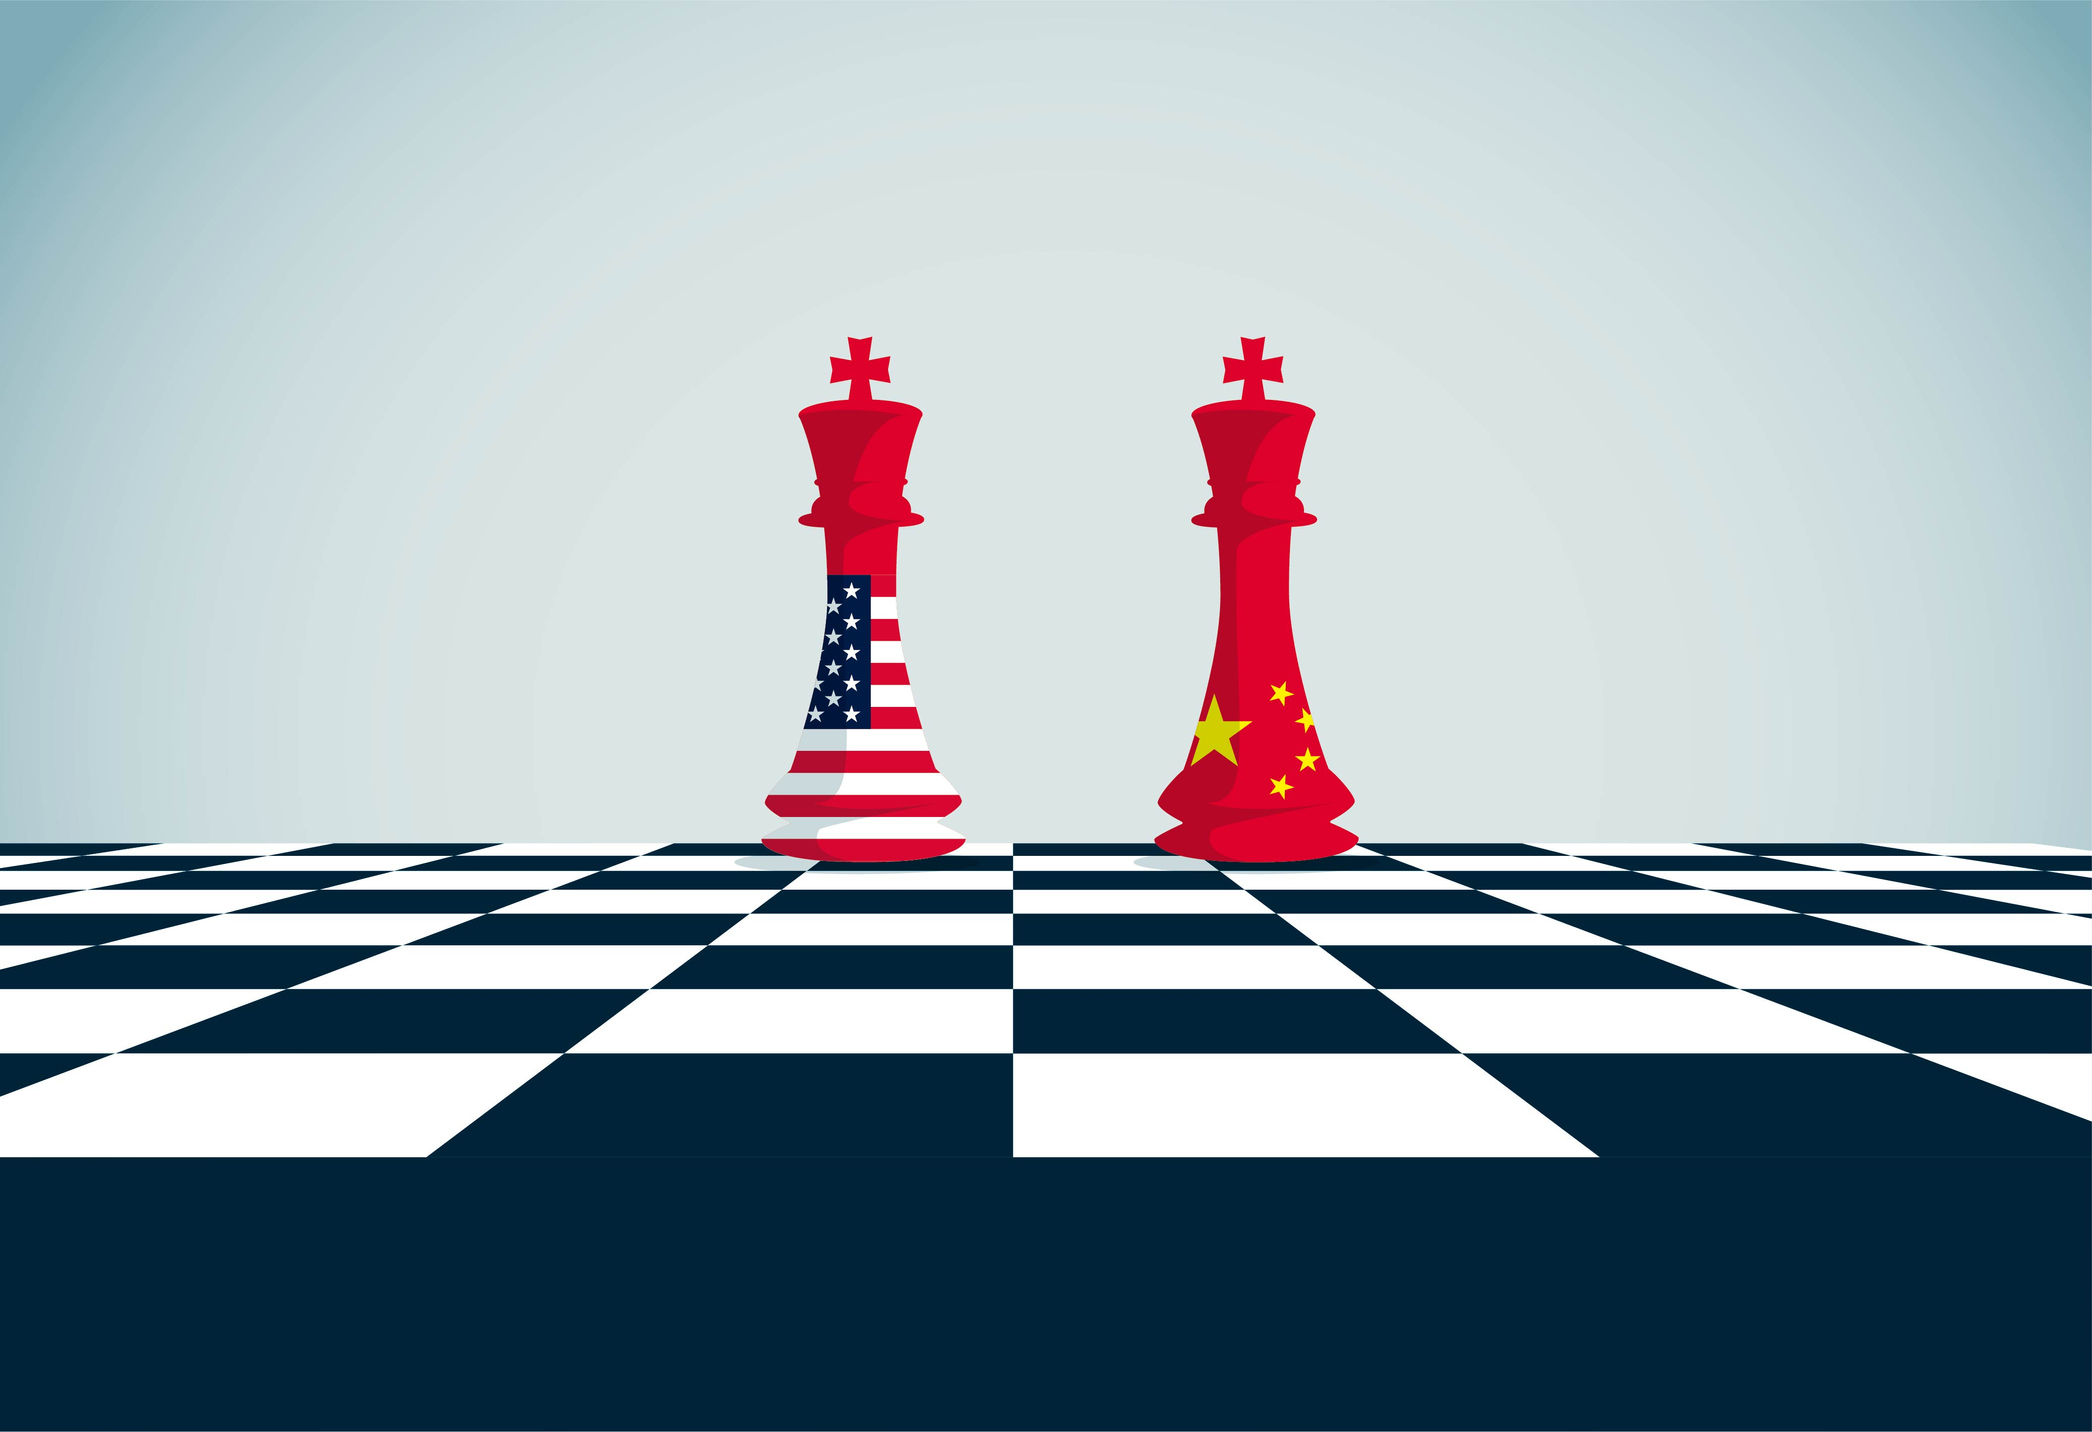 America and China on the chessboard